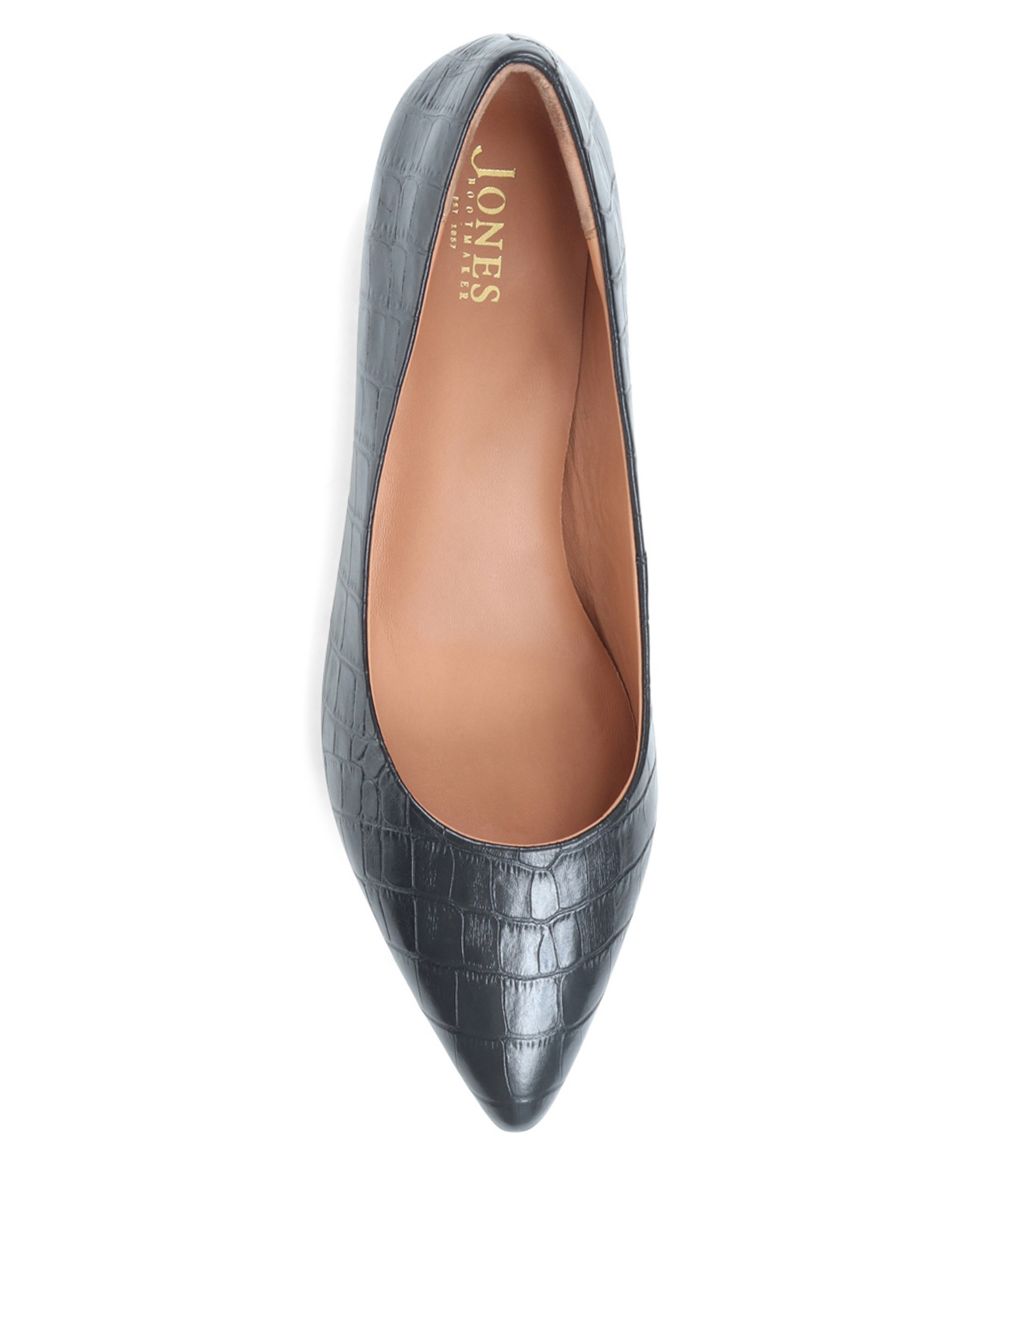 Leather Block Heel Pointed Court Shoes image 2